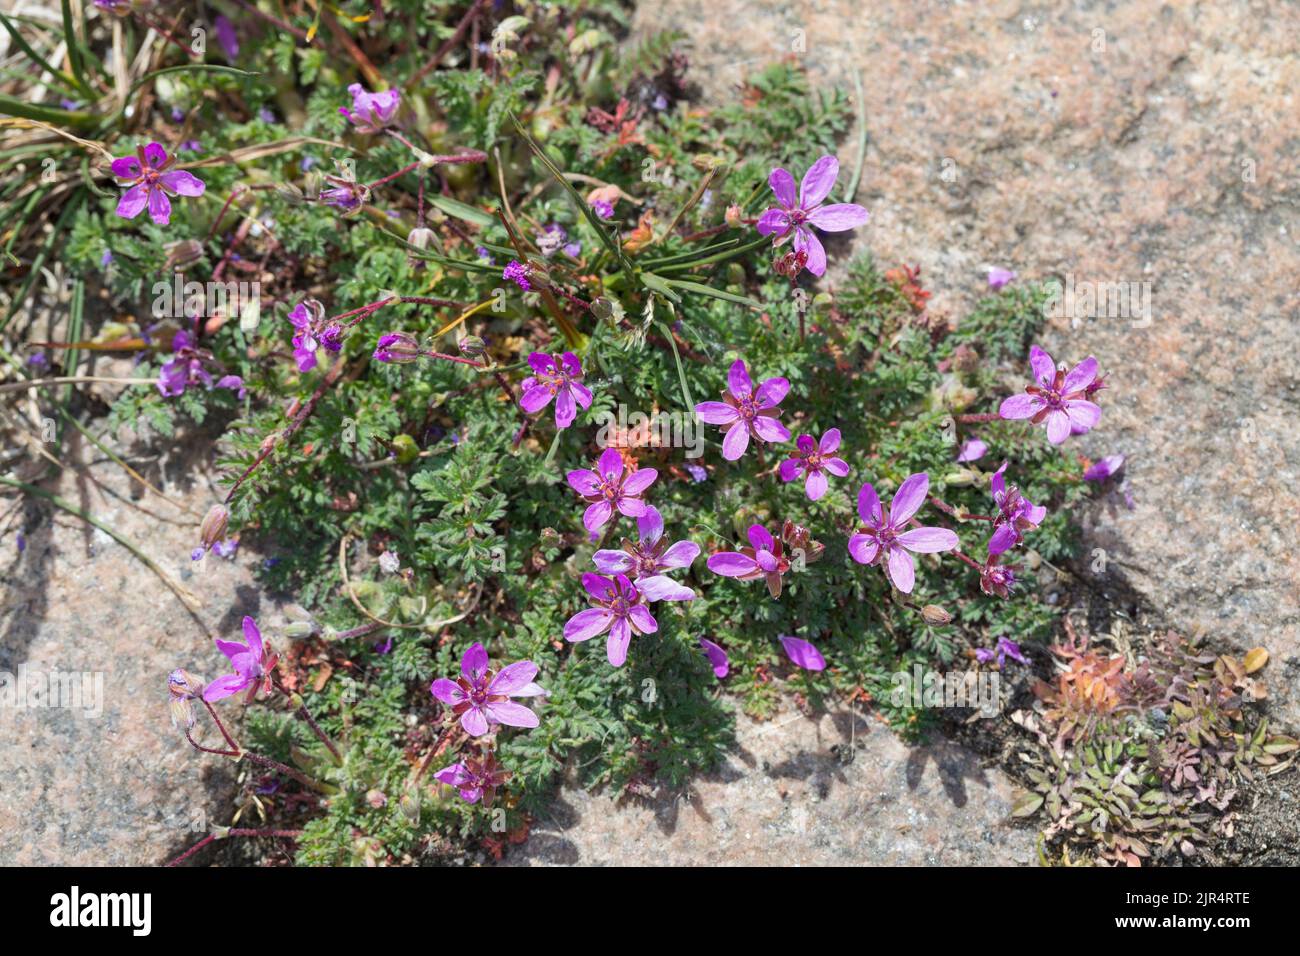 common stork's-bill, red-stemmed filaree, pin clover (Erodium cicutarium), grows in paving gaps, Germany Stock Photo